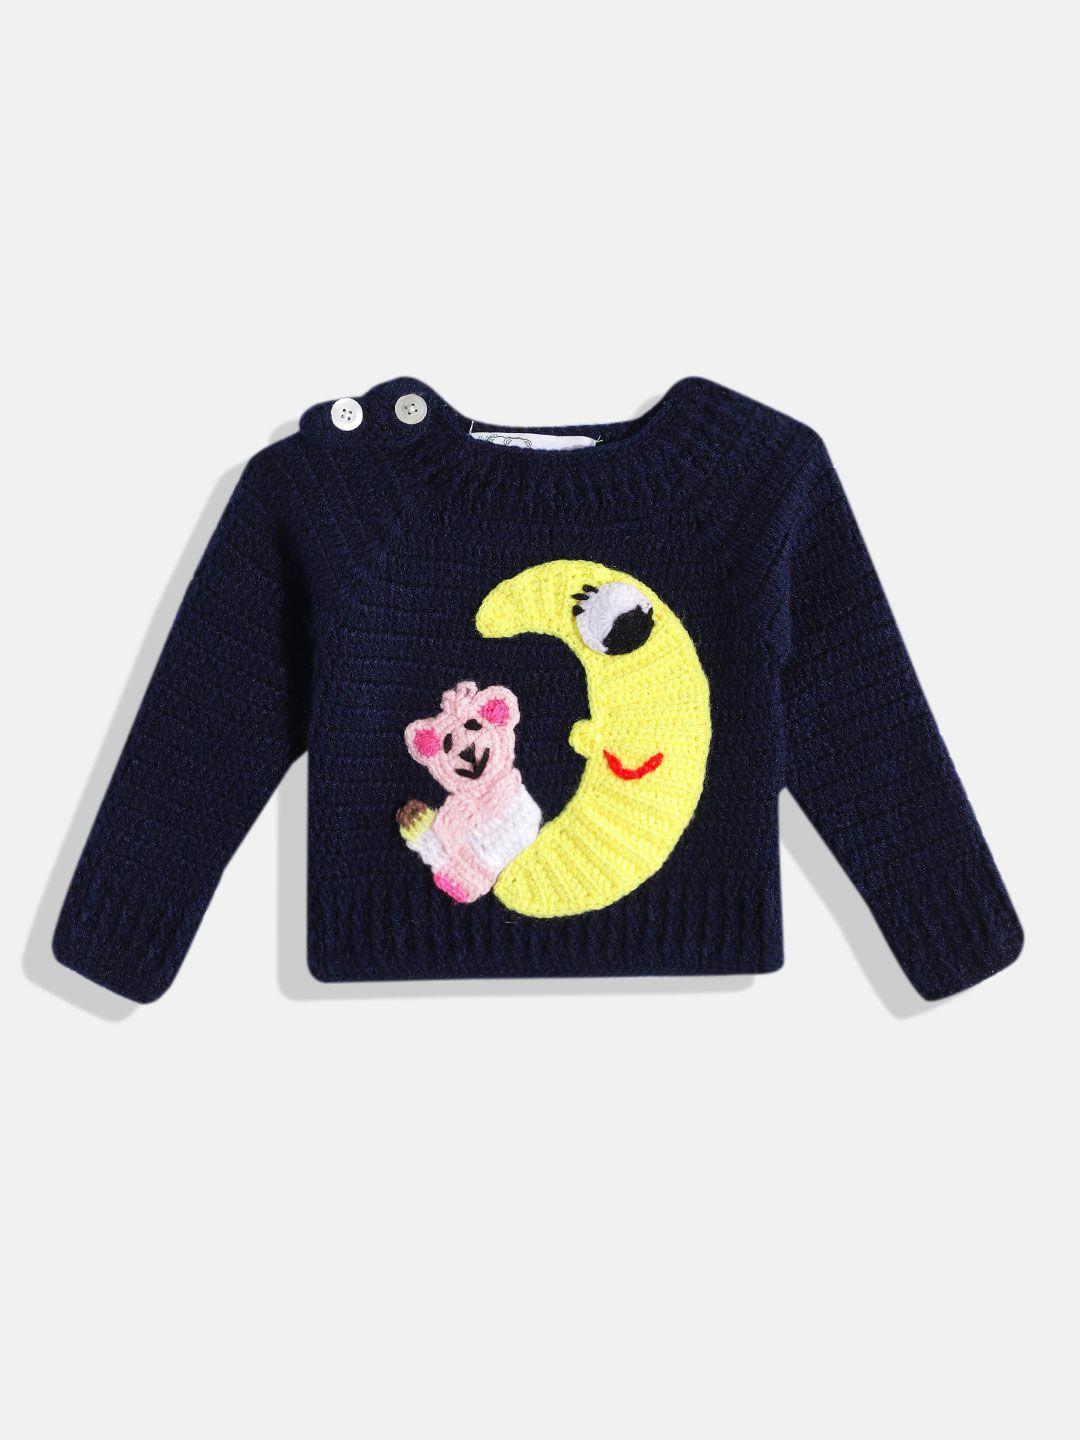 chutput unisex kids knitted woollen pullover with embroidered detail